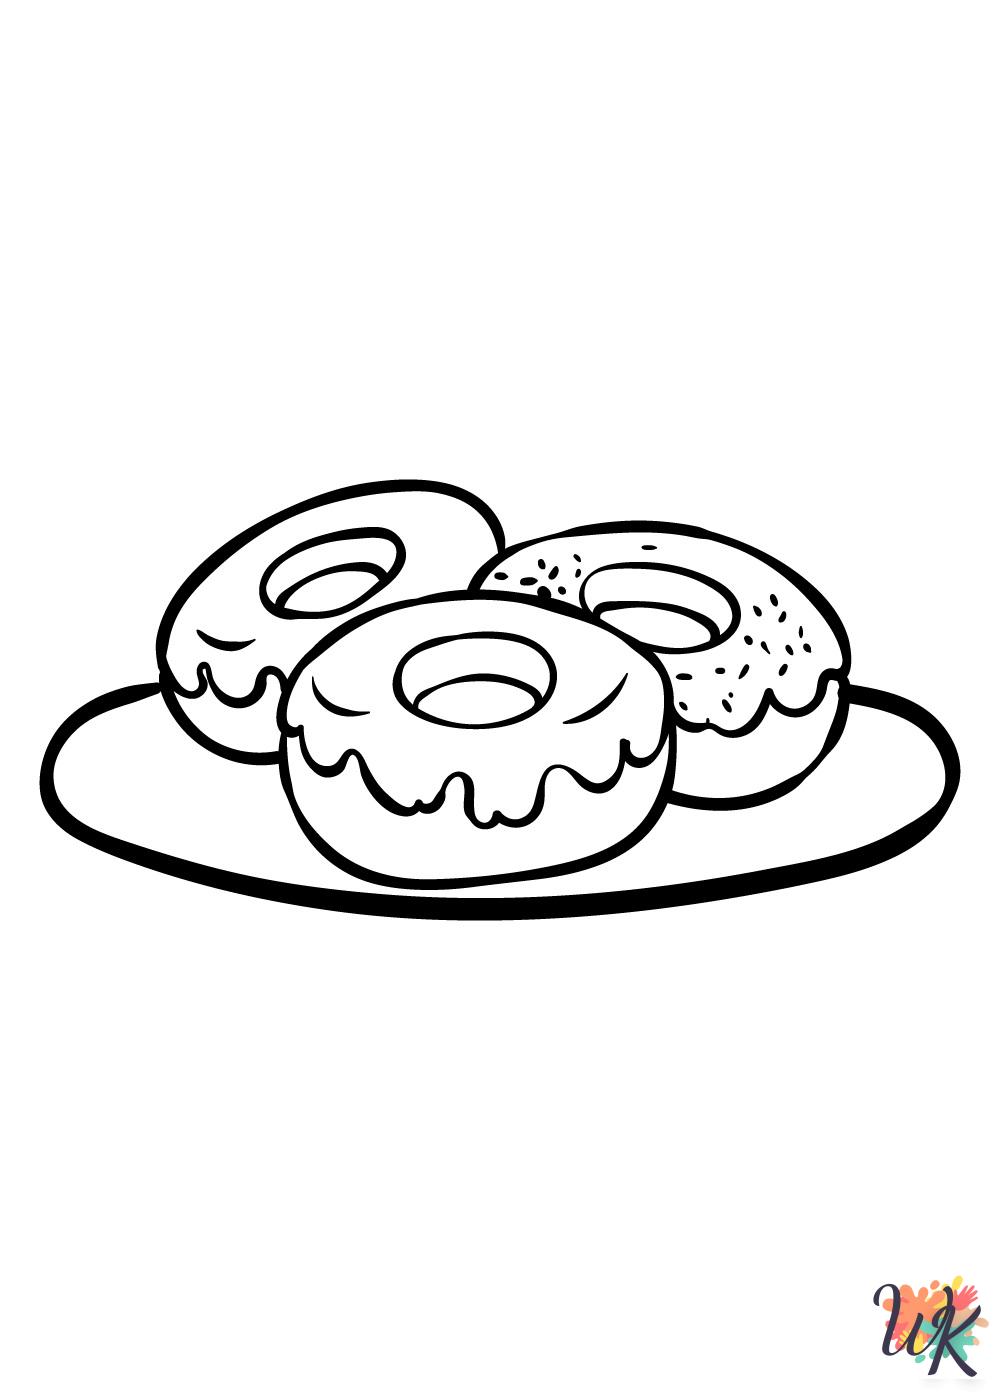 Donut ornament coloring pages